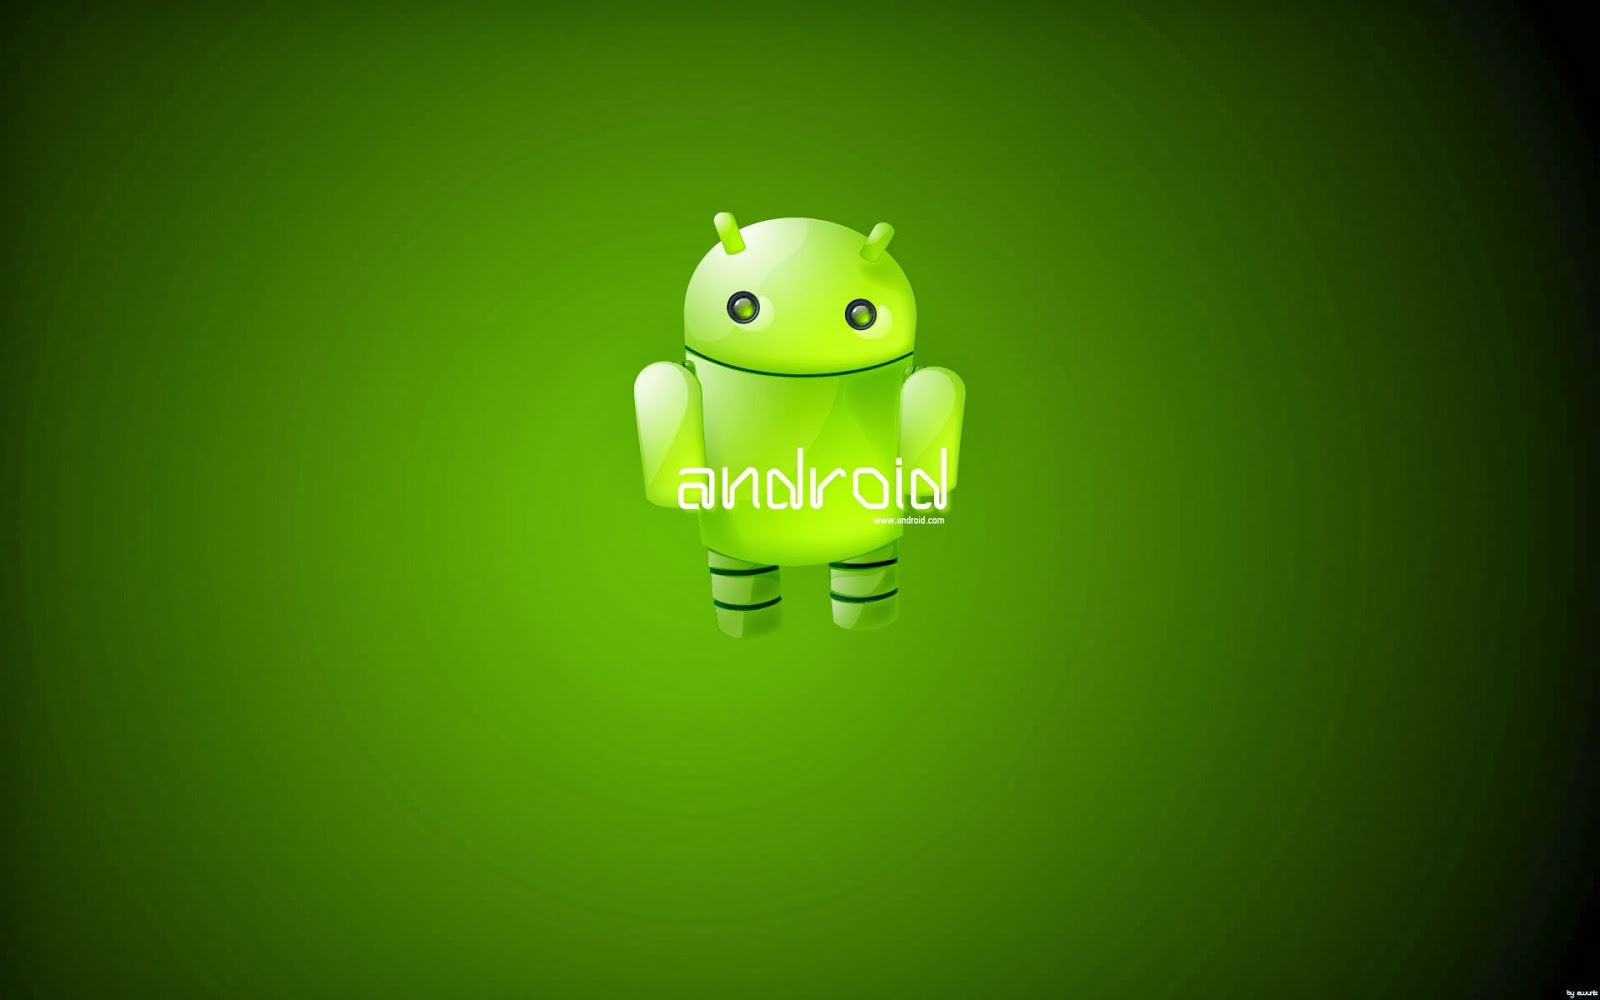 HD Wallpaper And Make This Android S For Your Desktop